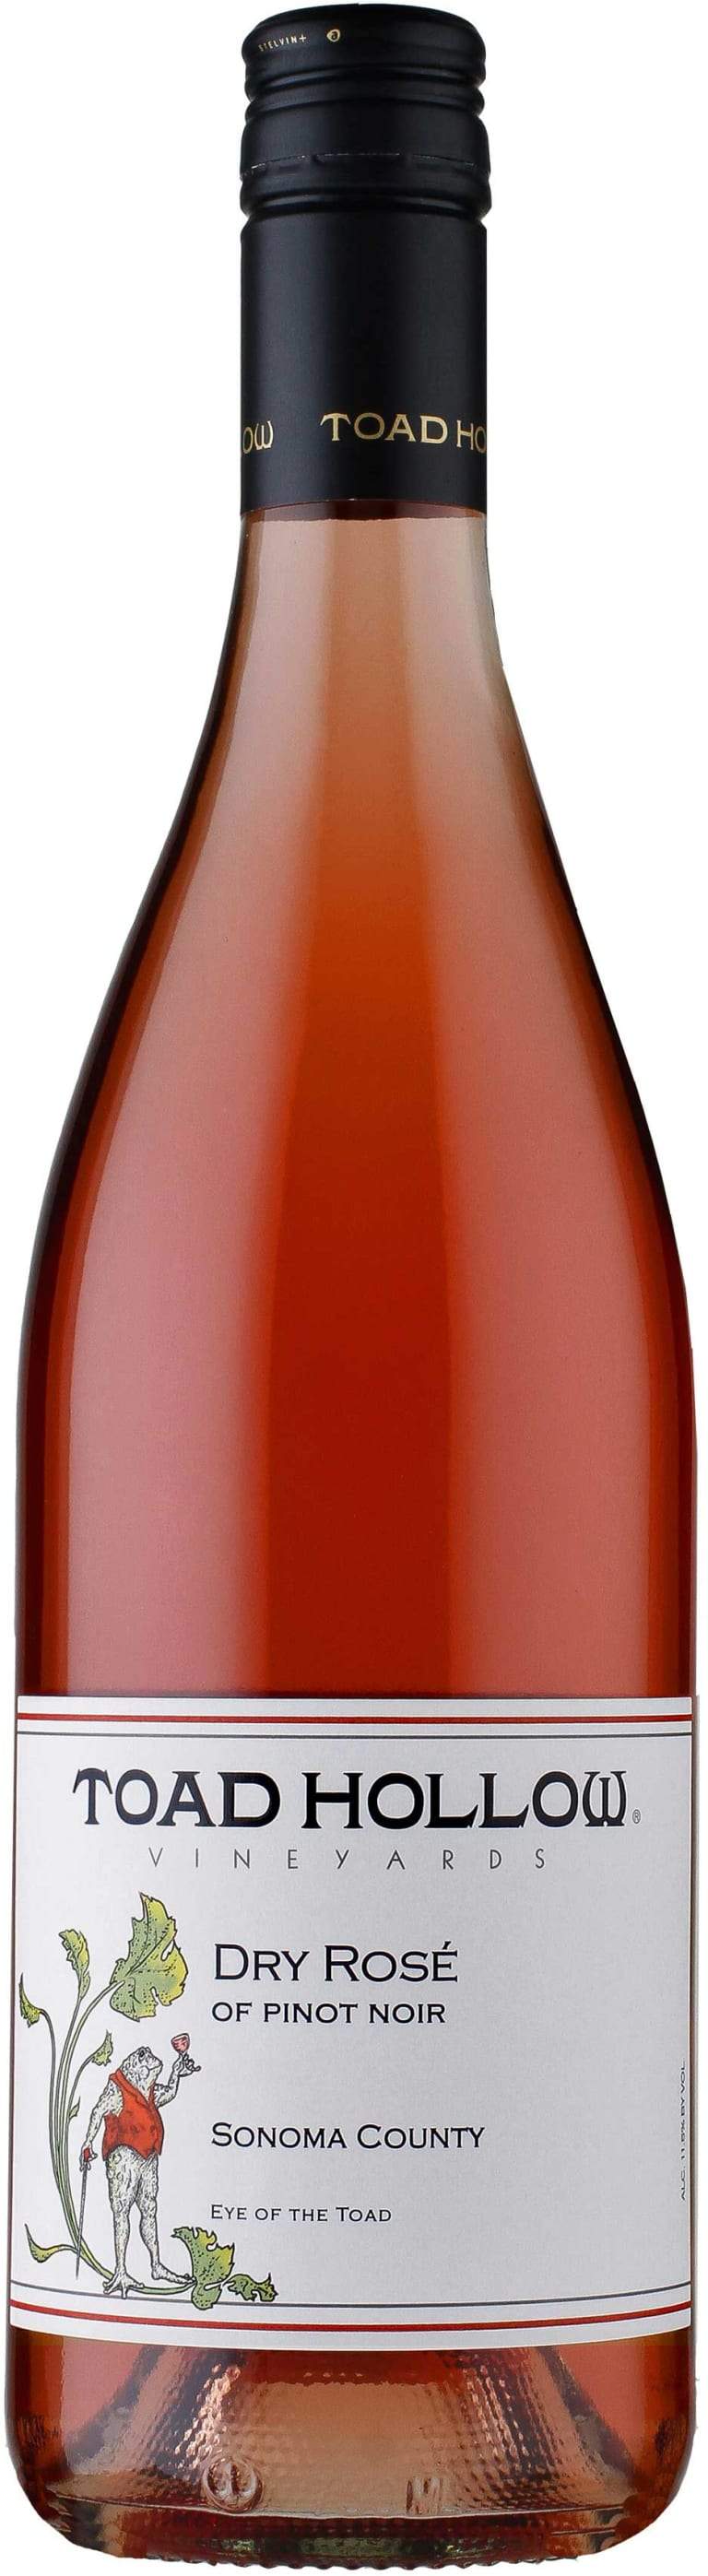 Toad Hollow Pinot Noir Rose Dry Eye Of The Toad 2018